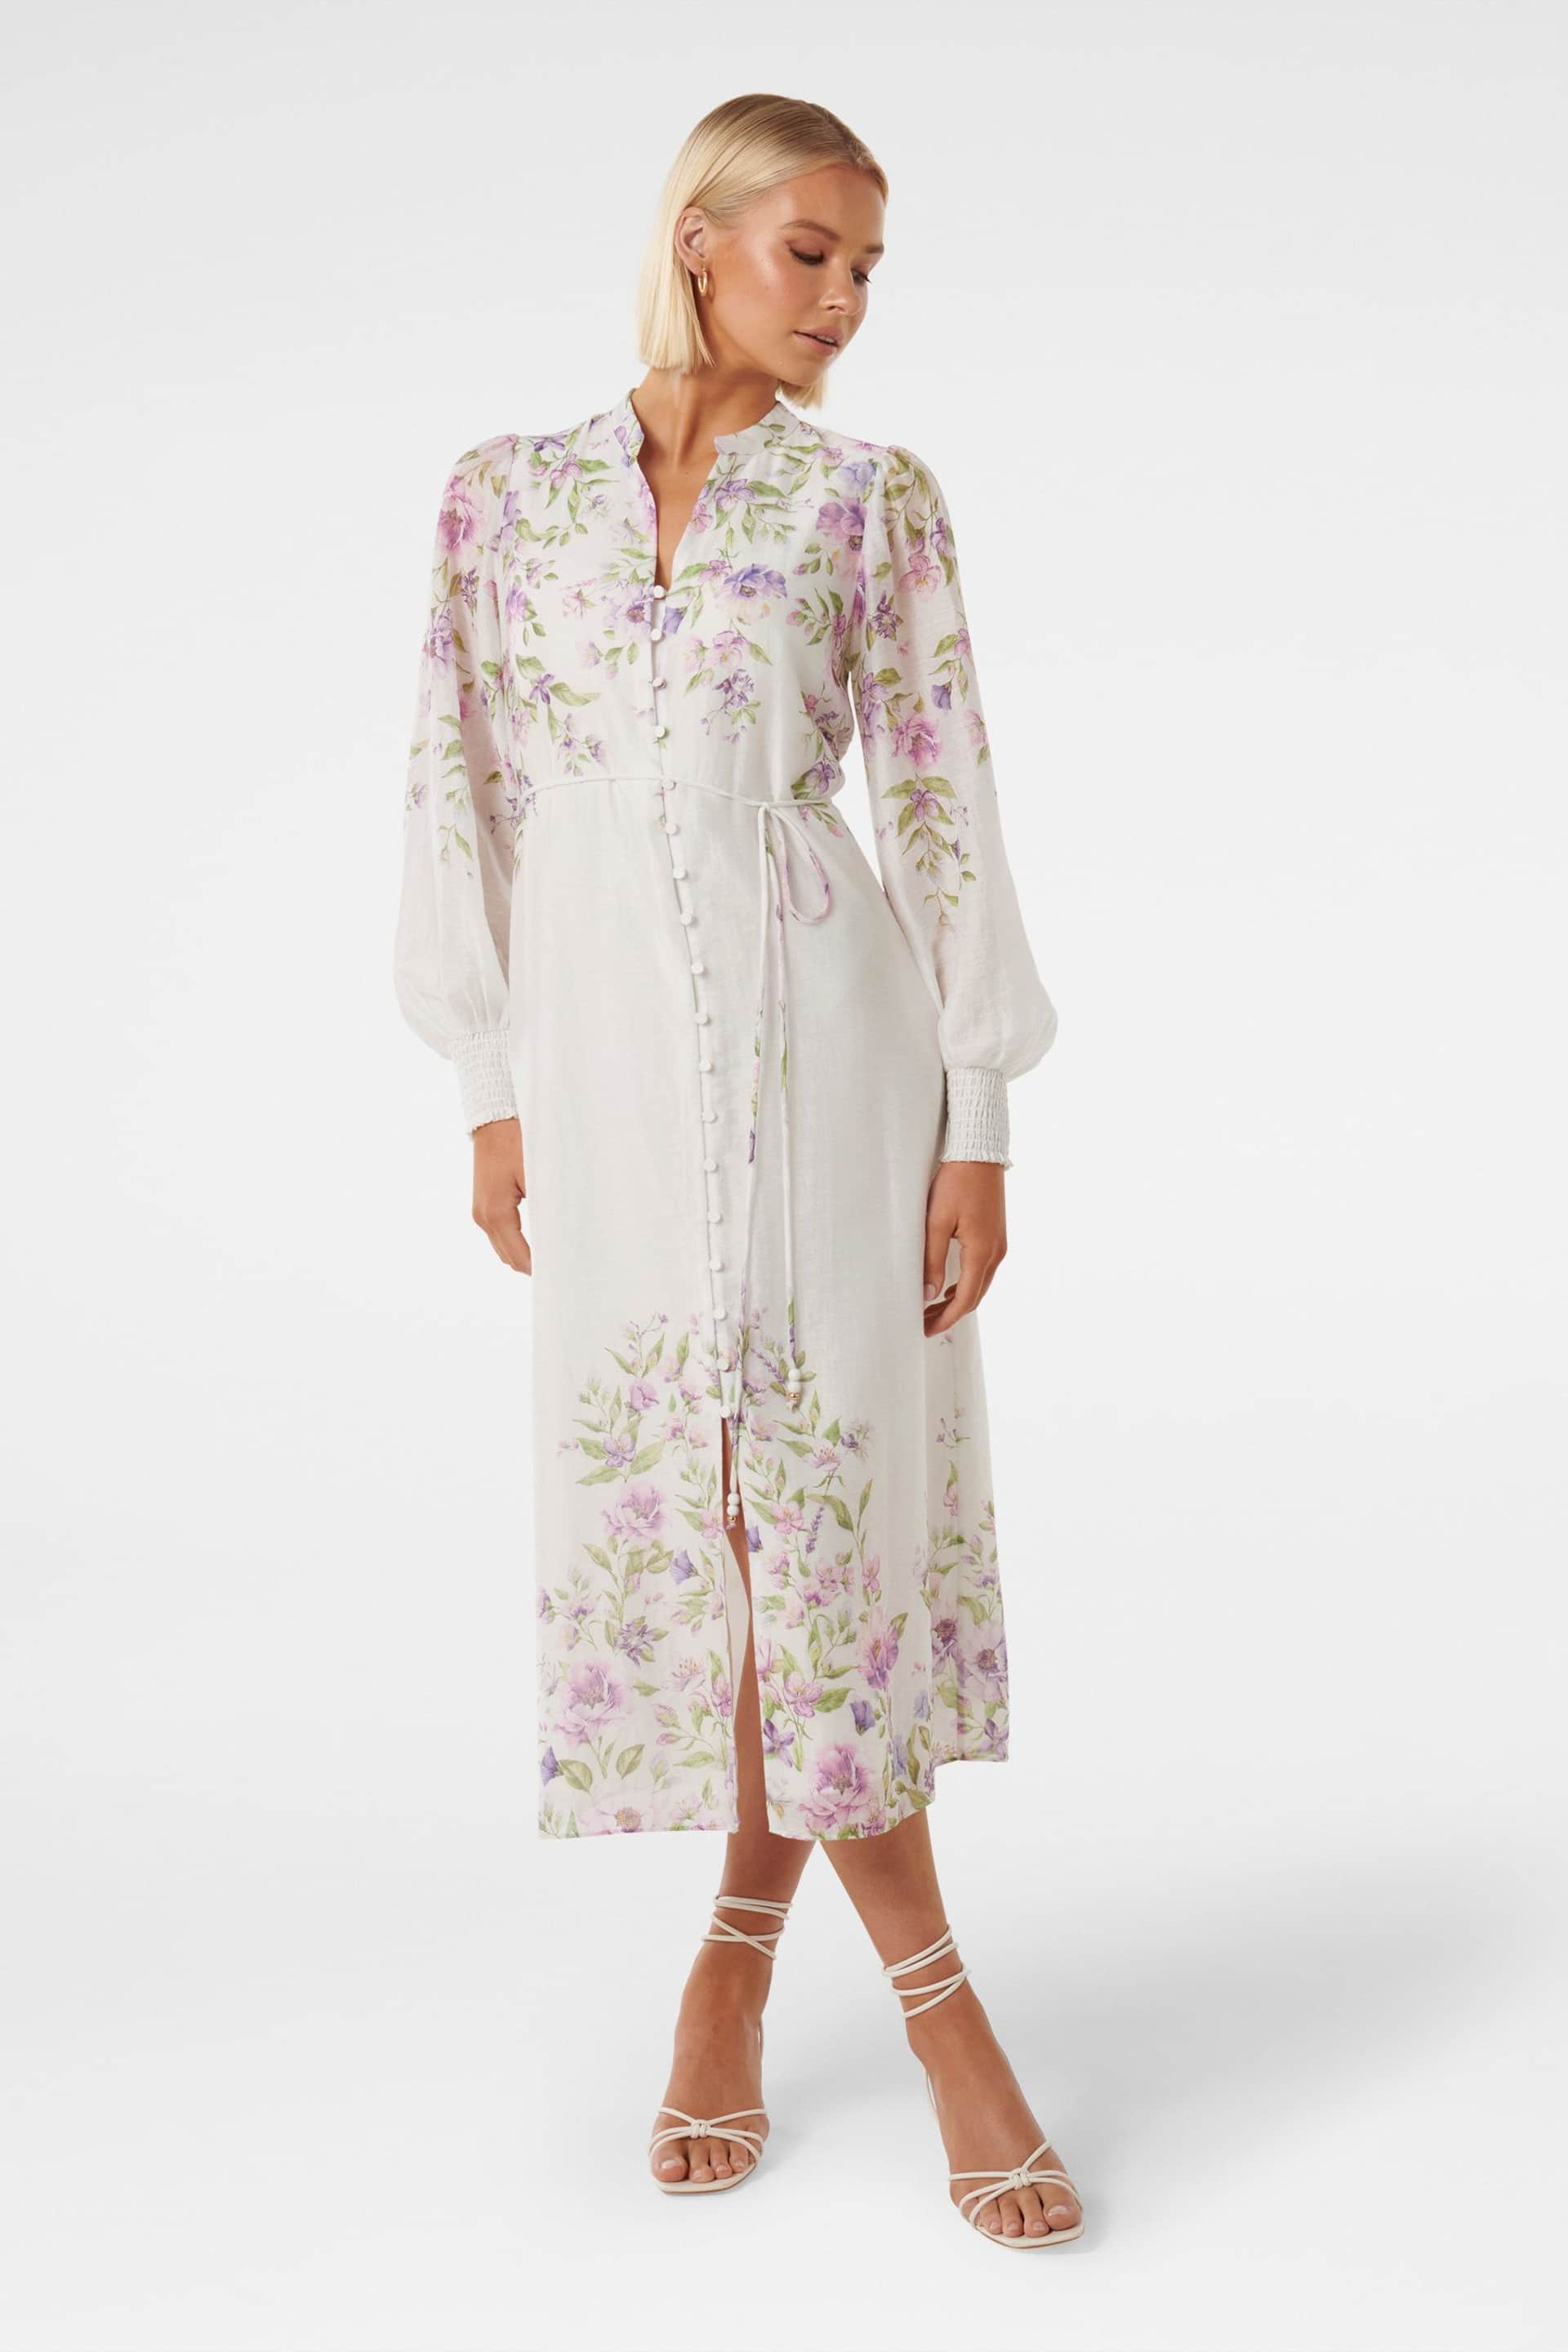 Forever New White Olympia Printed Shirt Dress contains Linen - Image 1 of 4